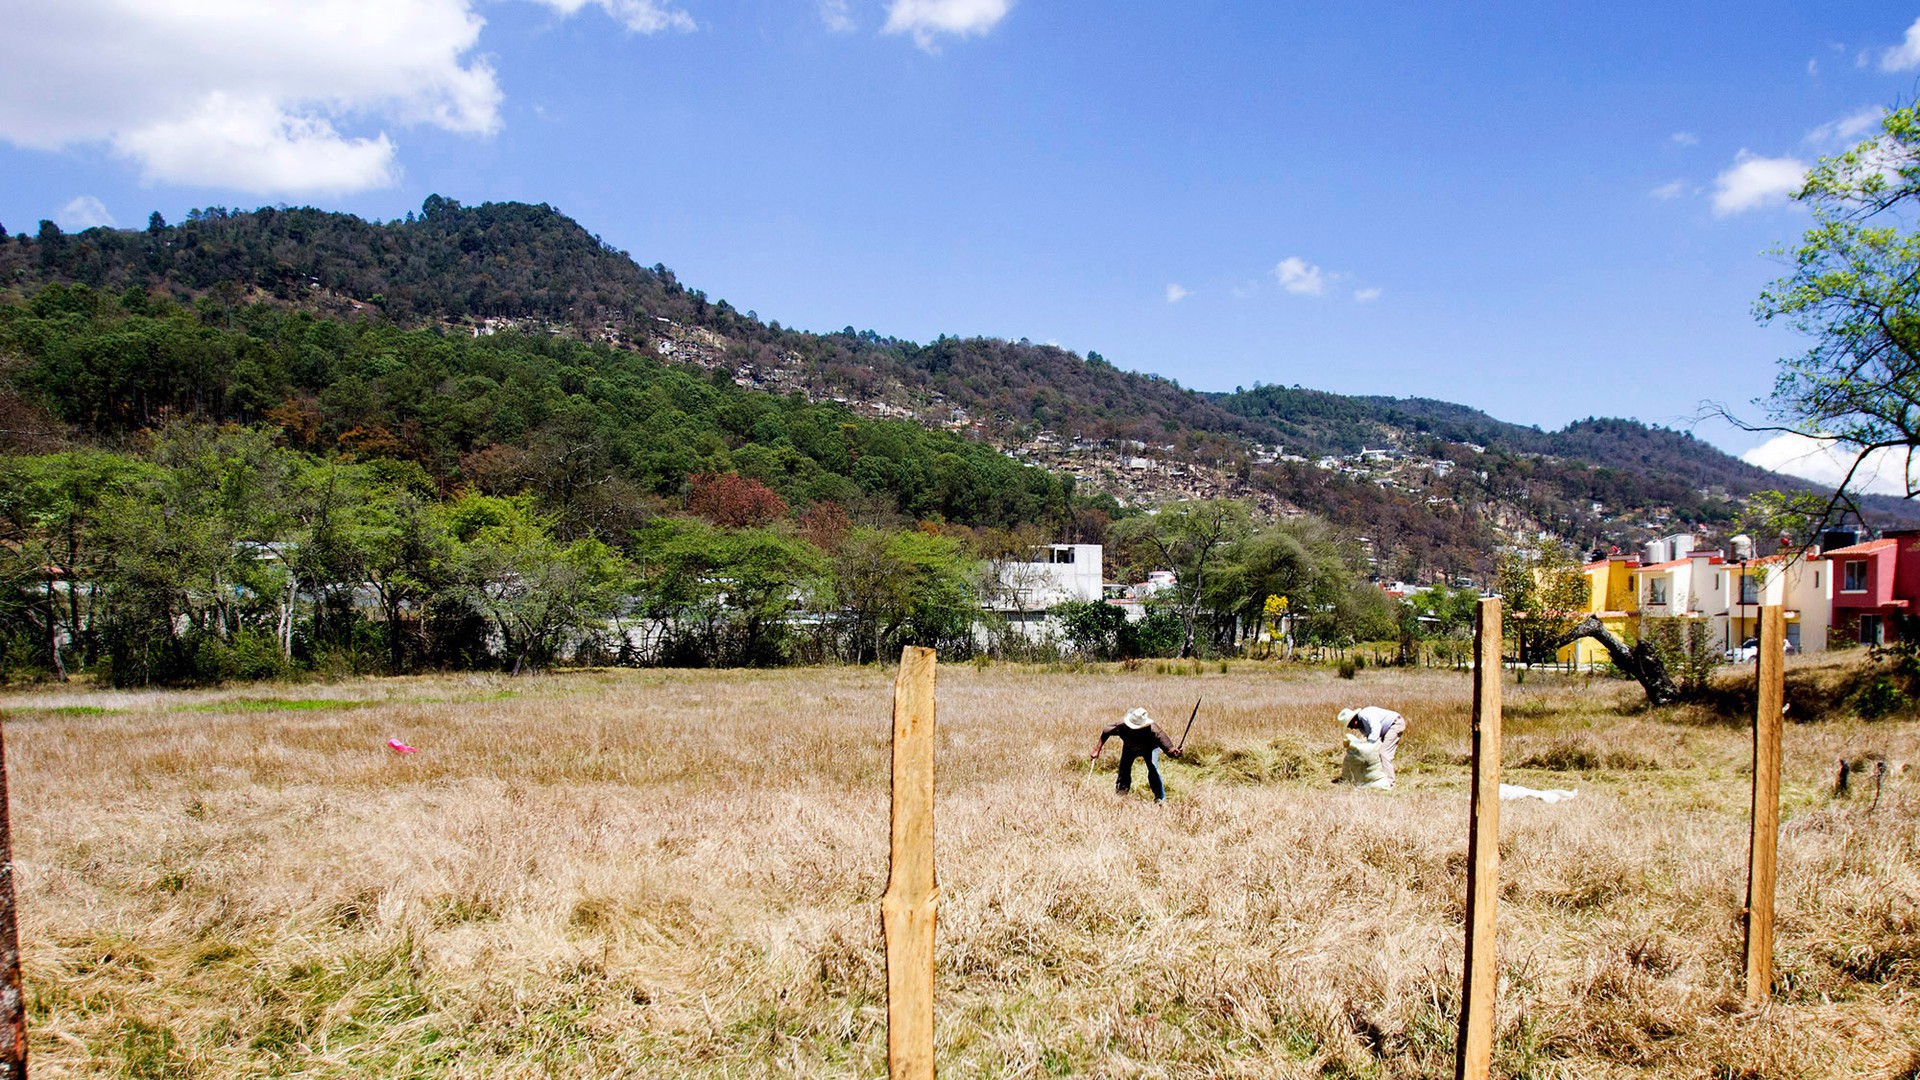 Two workers cut grass on Edwards' land, Racnho El Ar, in San Cristóbal de las Casas, Chiapas, Mex., to feed to their cattle. (Photo by Connor Radnovich.)